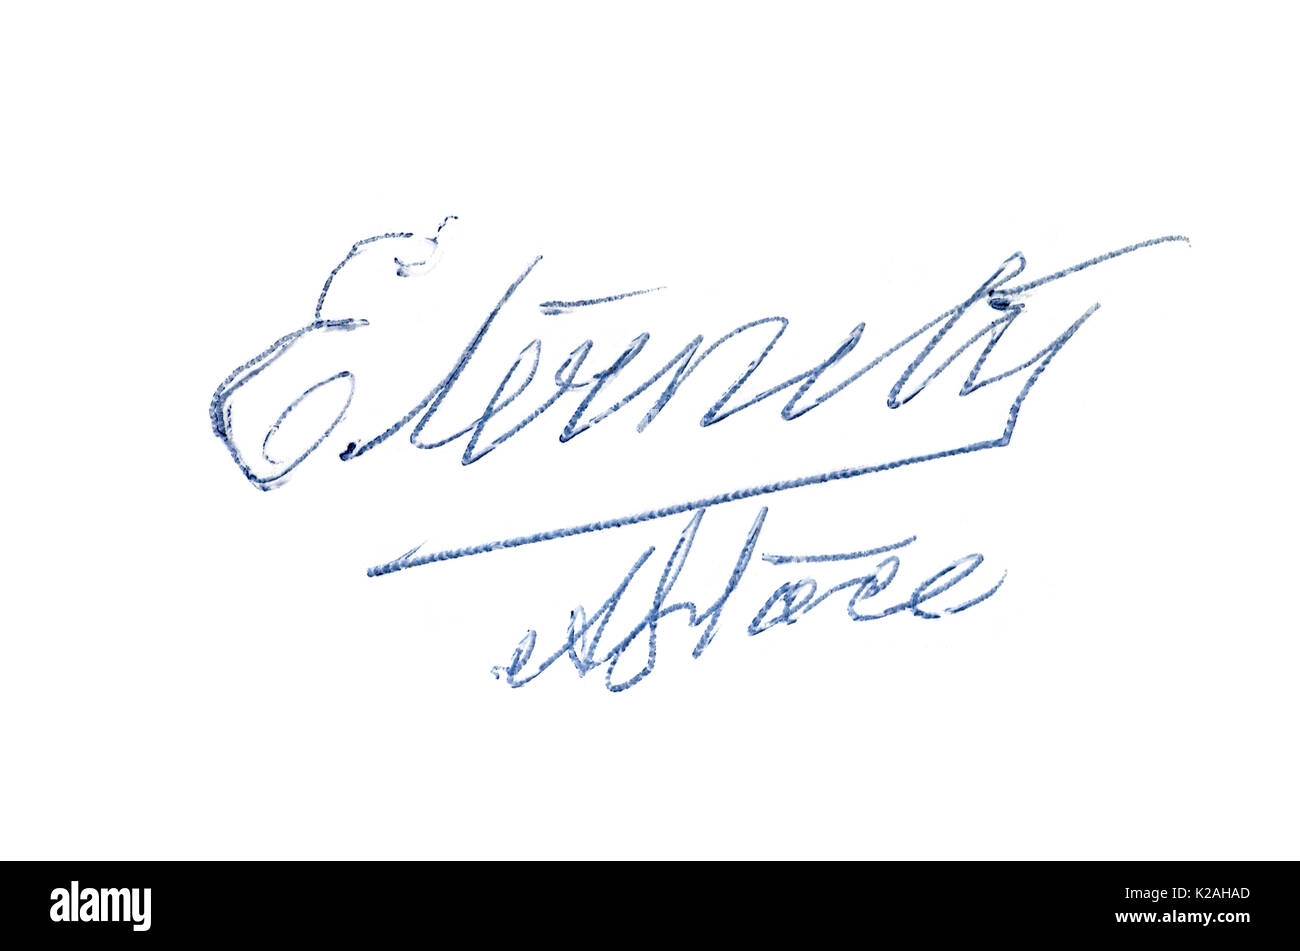 Eternity script and signature of Arthur Stace, For 37 years he chalked 'Eternity' on Sydney Footpaths and walls. Stock Photo